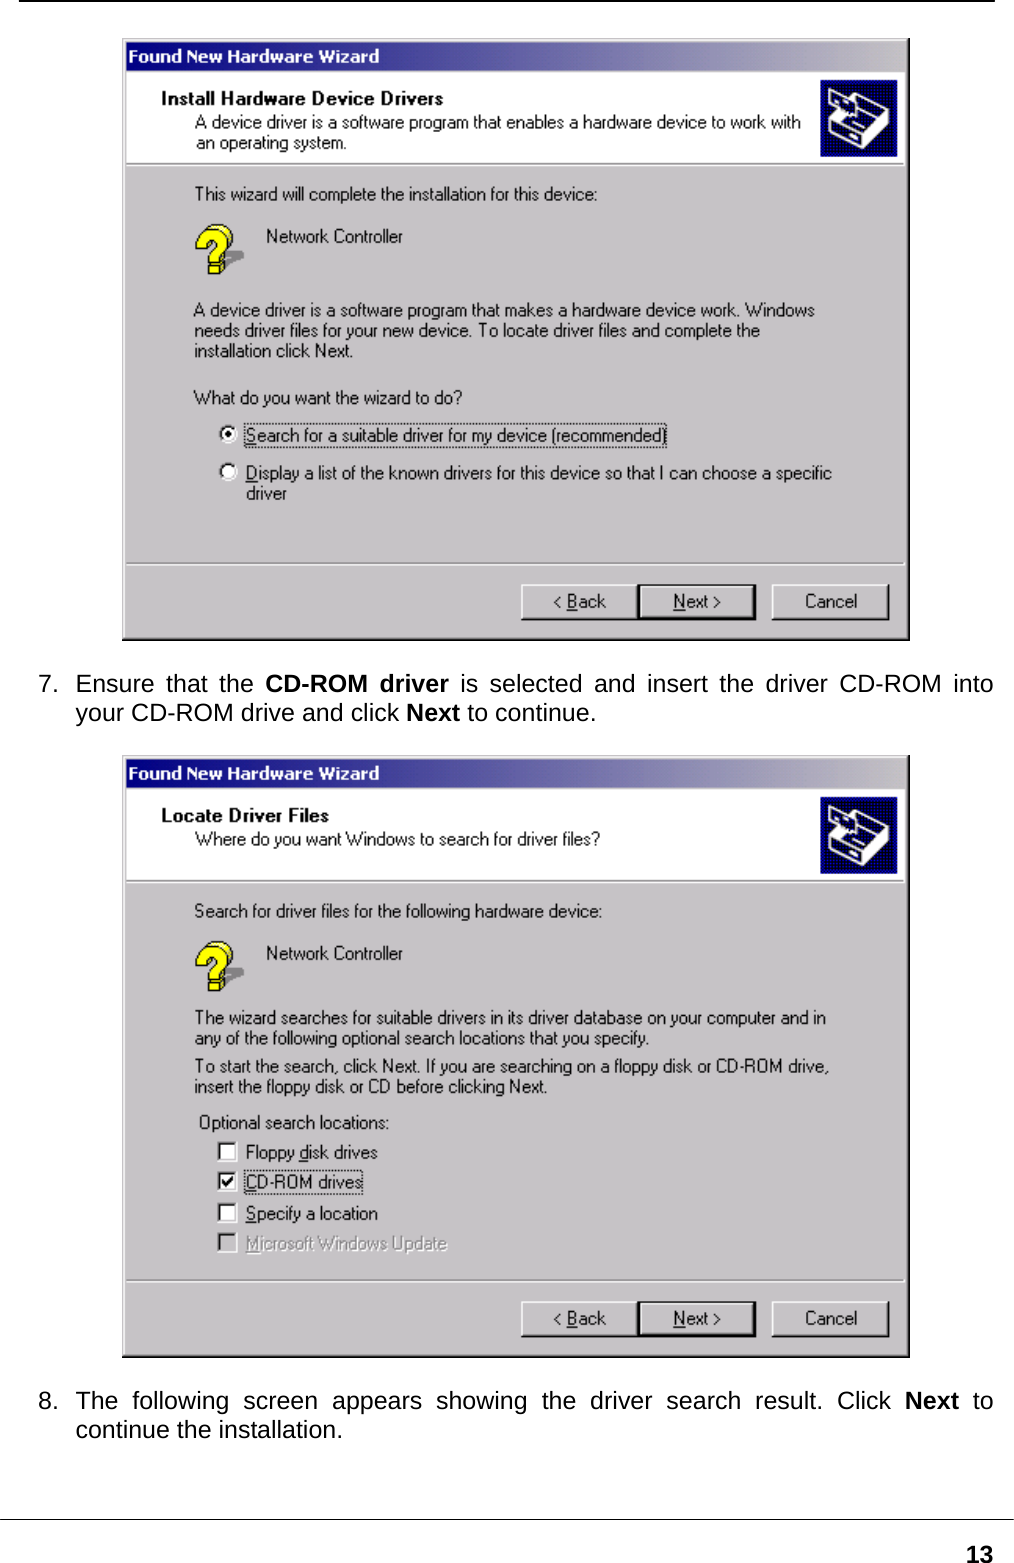   13  7.  Ensure that the CD-ROM driver is selected and insert the driver CD-ROM into your CD-ROM drive and click Next to continue.    8. The following screen appears showing the driver search result. Click Next  to continue the installation.  